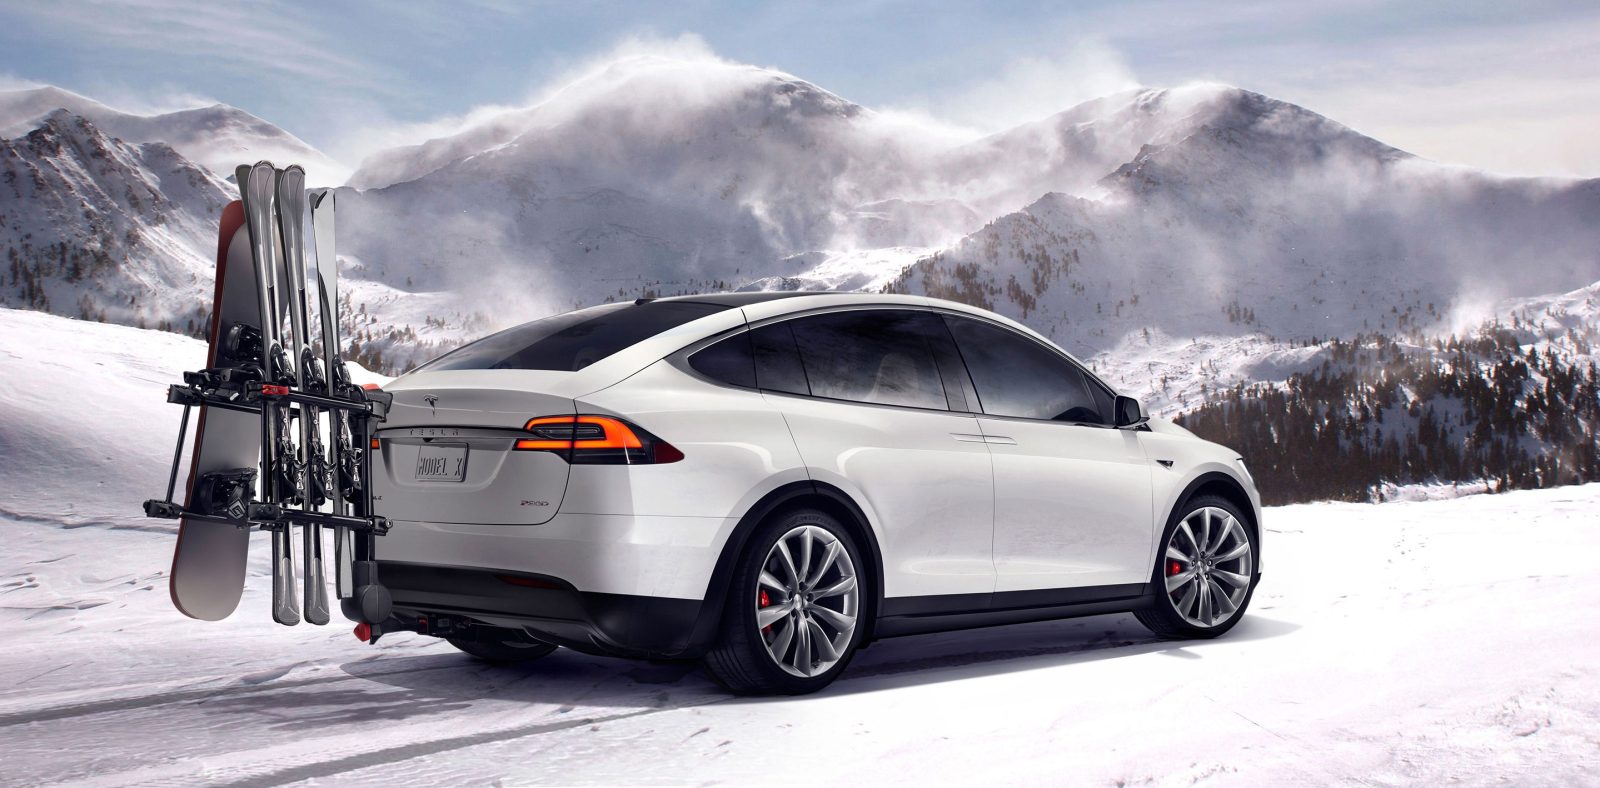 Tesla To Offer Hitch Accessories At Model X Purchase To Get